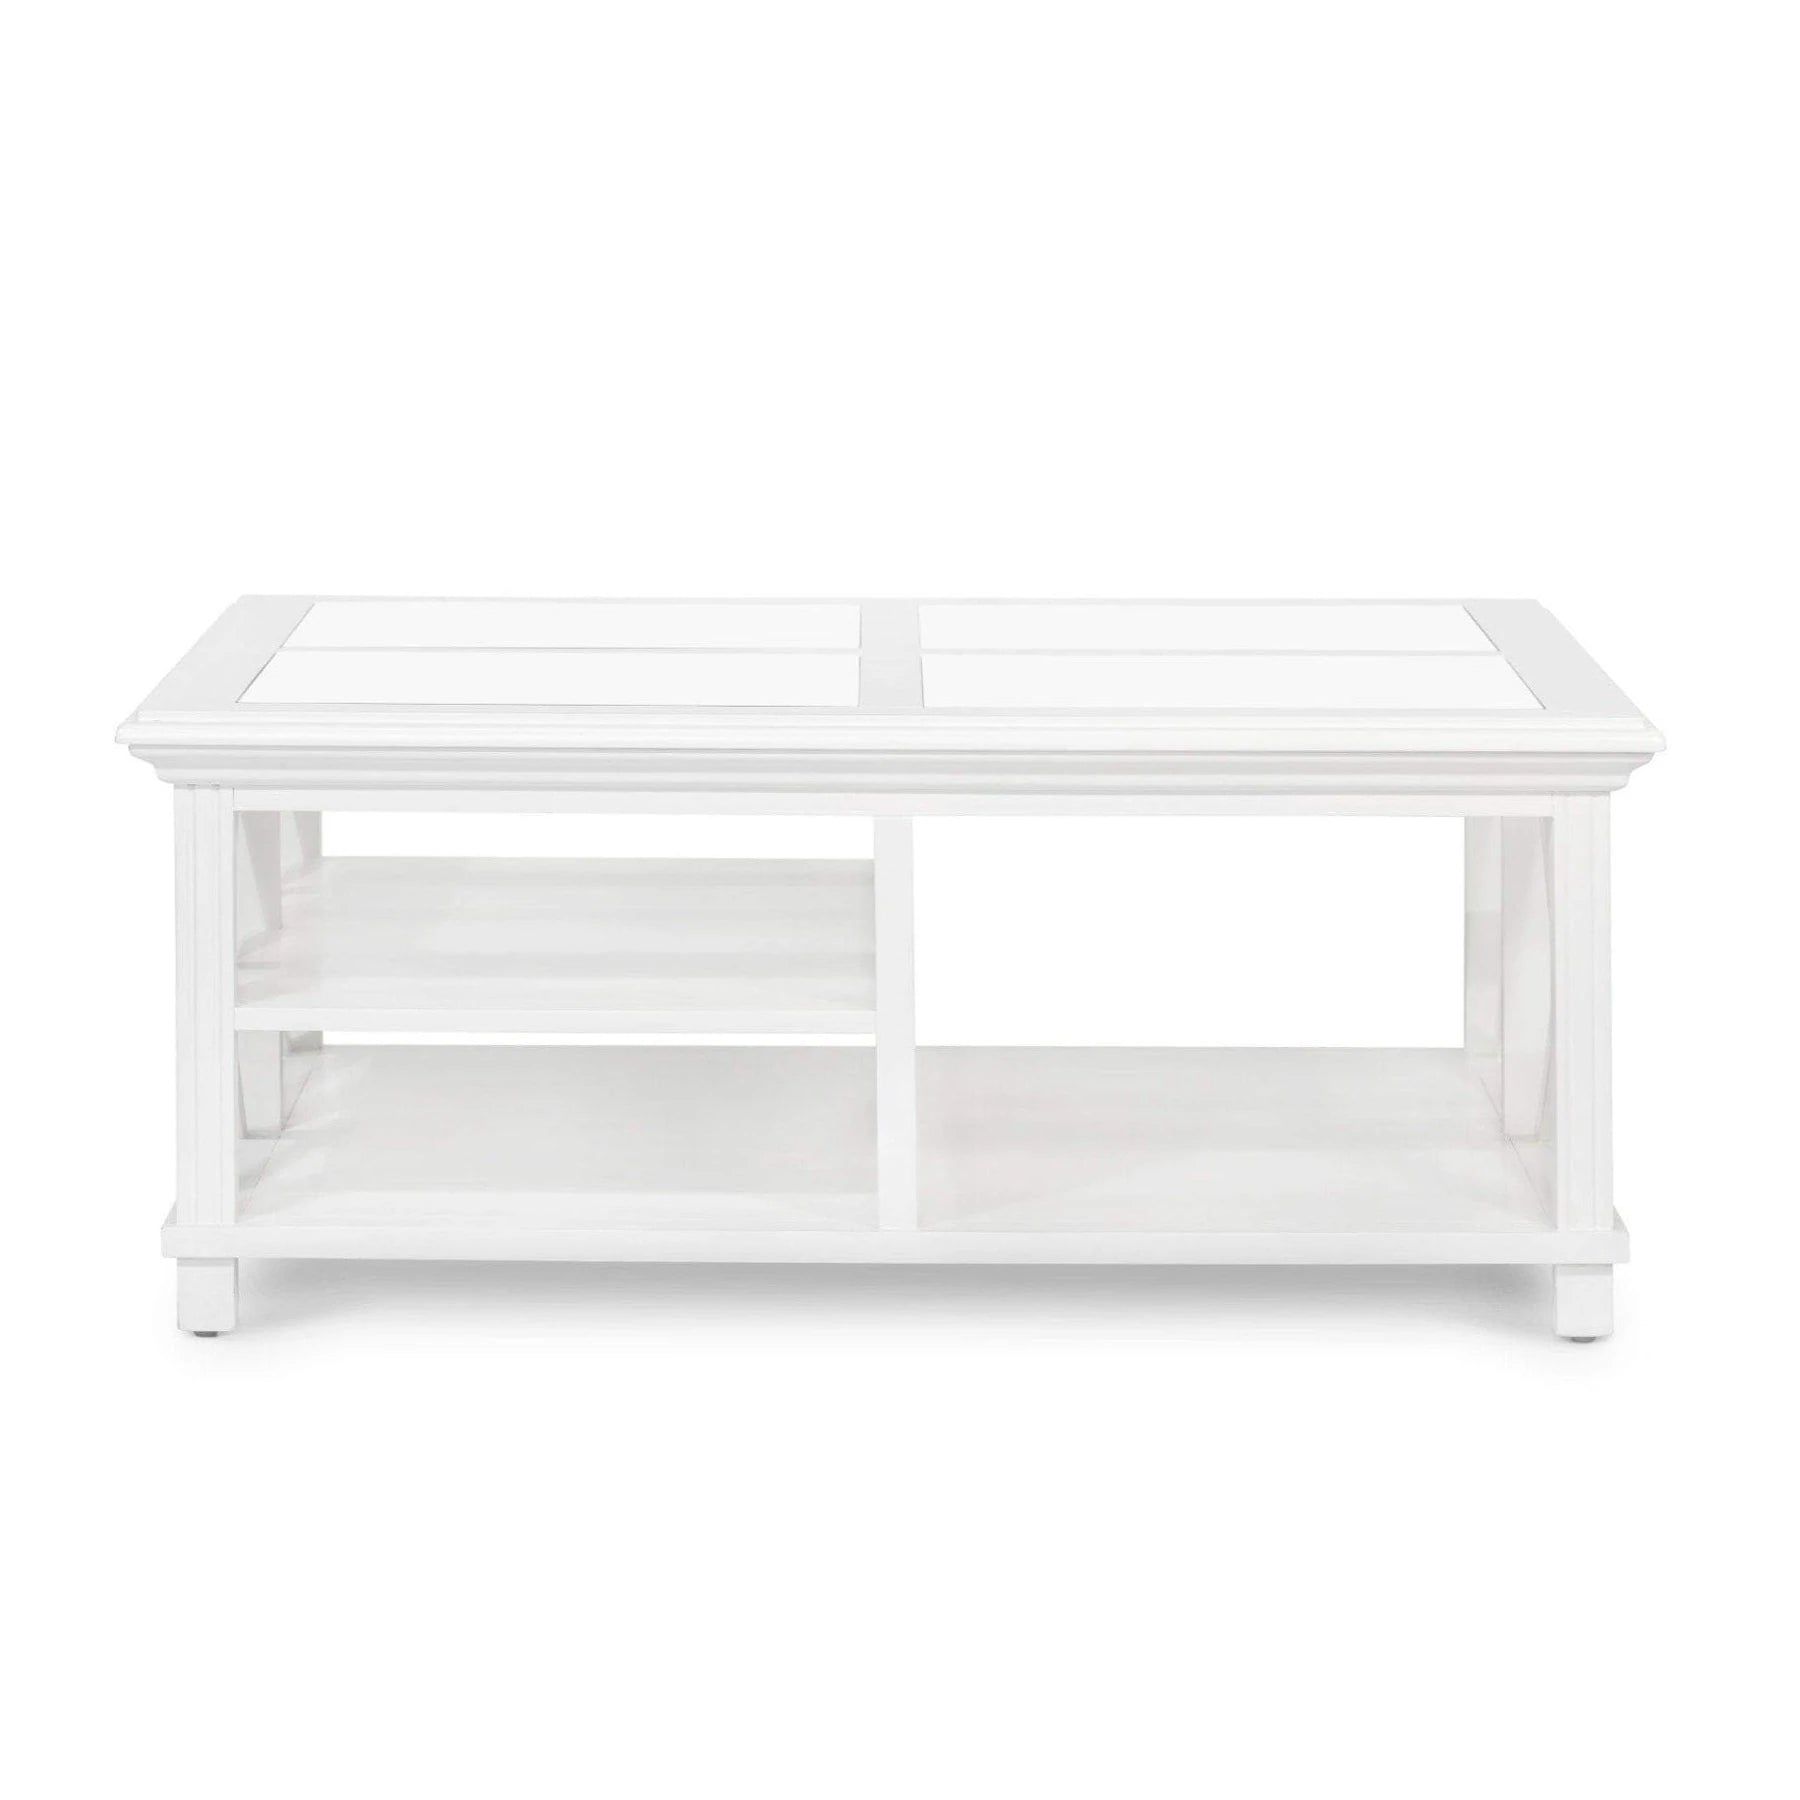 SORRENTO LARGE GLASS COFFEE TABLE WHITE